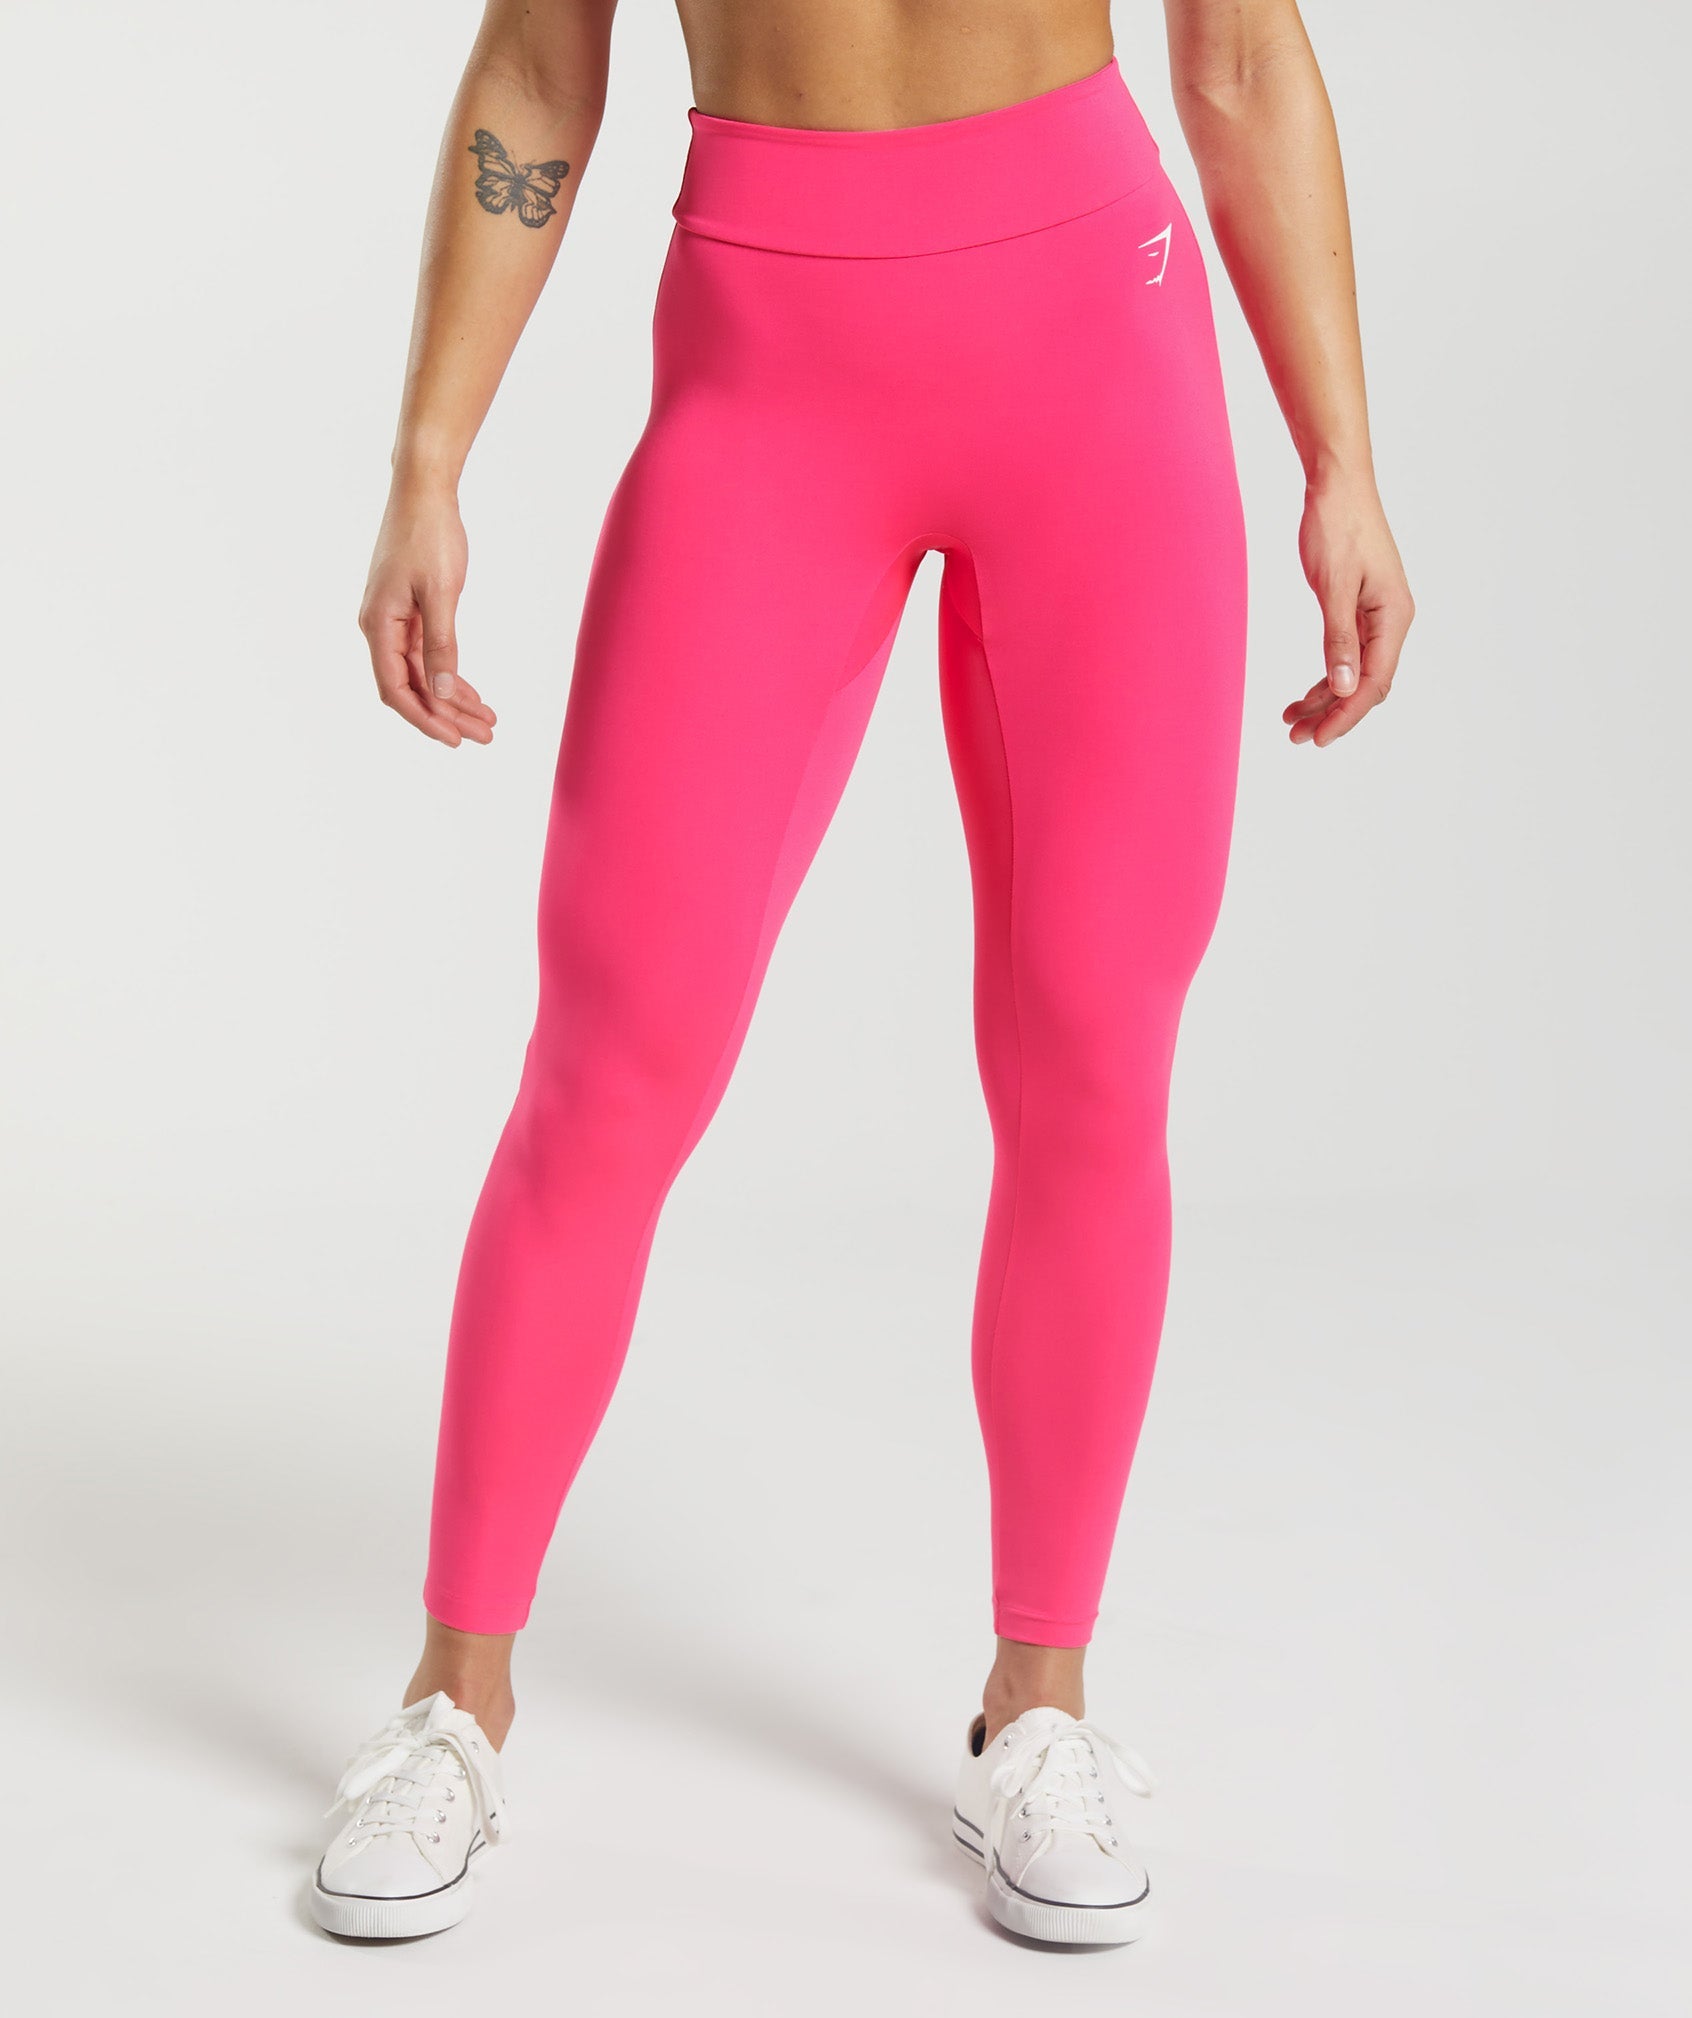 Tikiboo - Pretty in Pink Hello Kitty Active Pink Leggings - Get